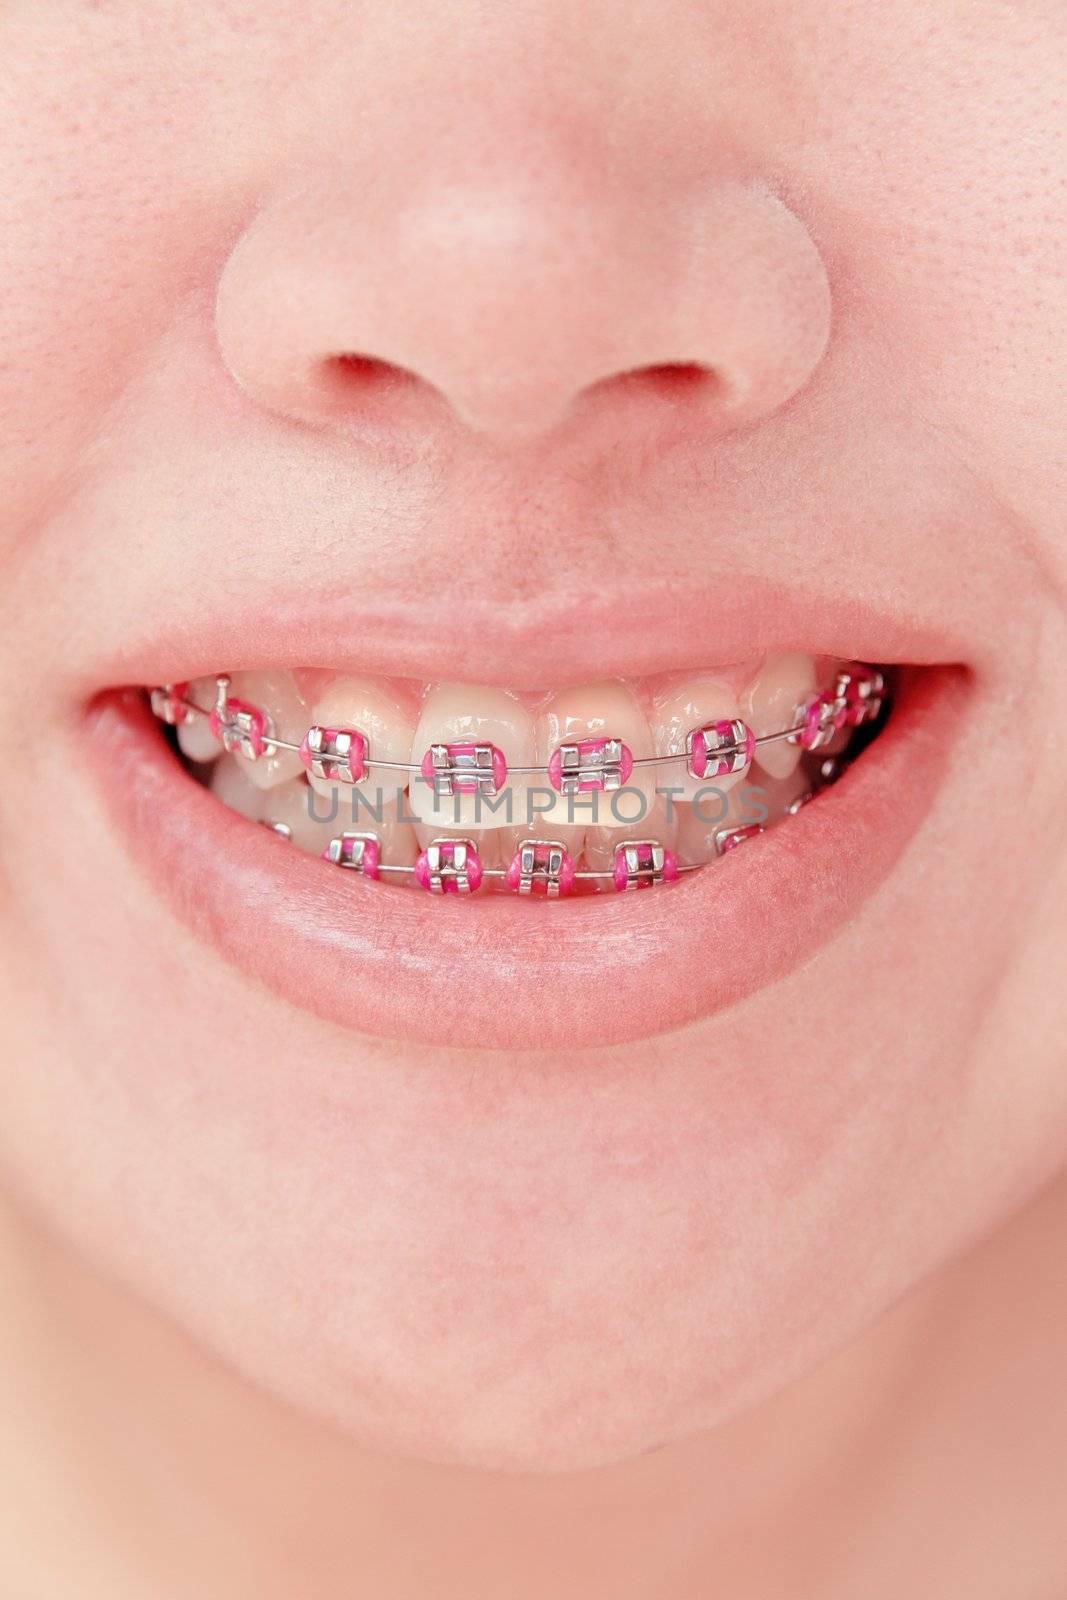 girl smiling with braces on teeth,dental concept